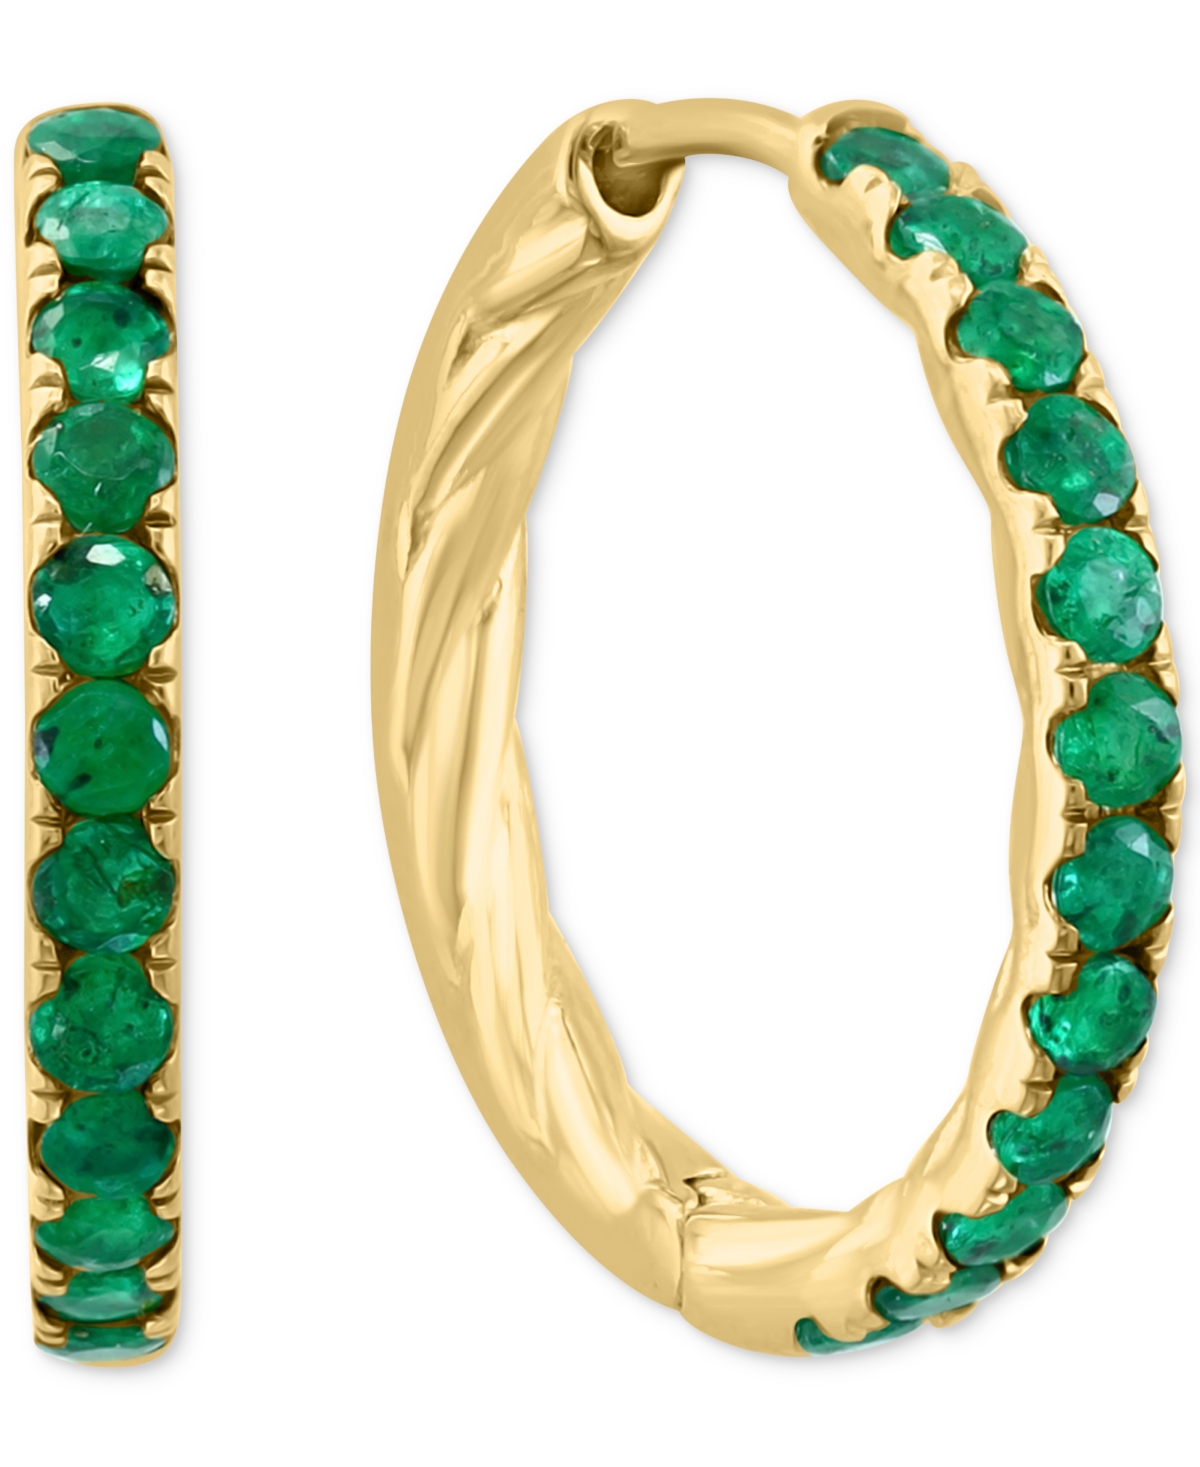 Effy Emerald Small Hoop Earrings (7/8 ct. t.w.) in Gold-Plated Sterling Silver, 0.5" (Also available in Sapphire and Ruby) - Emerald